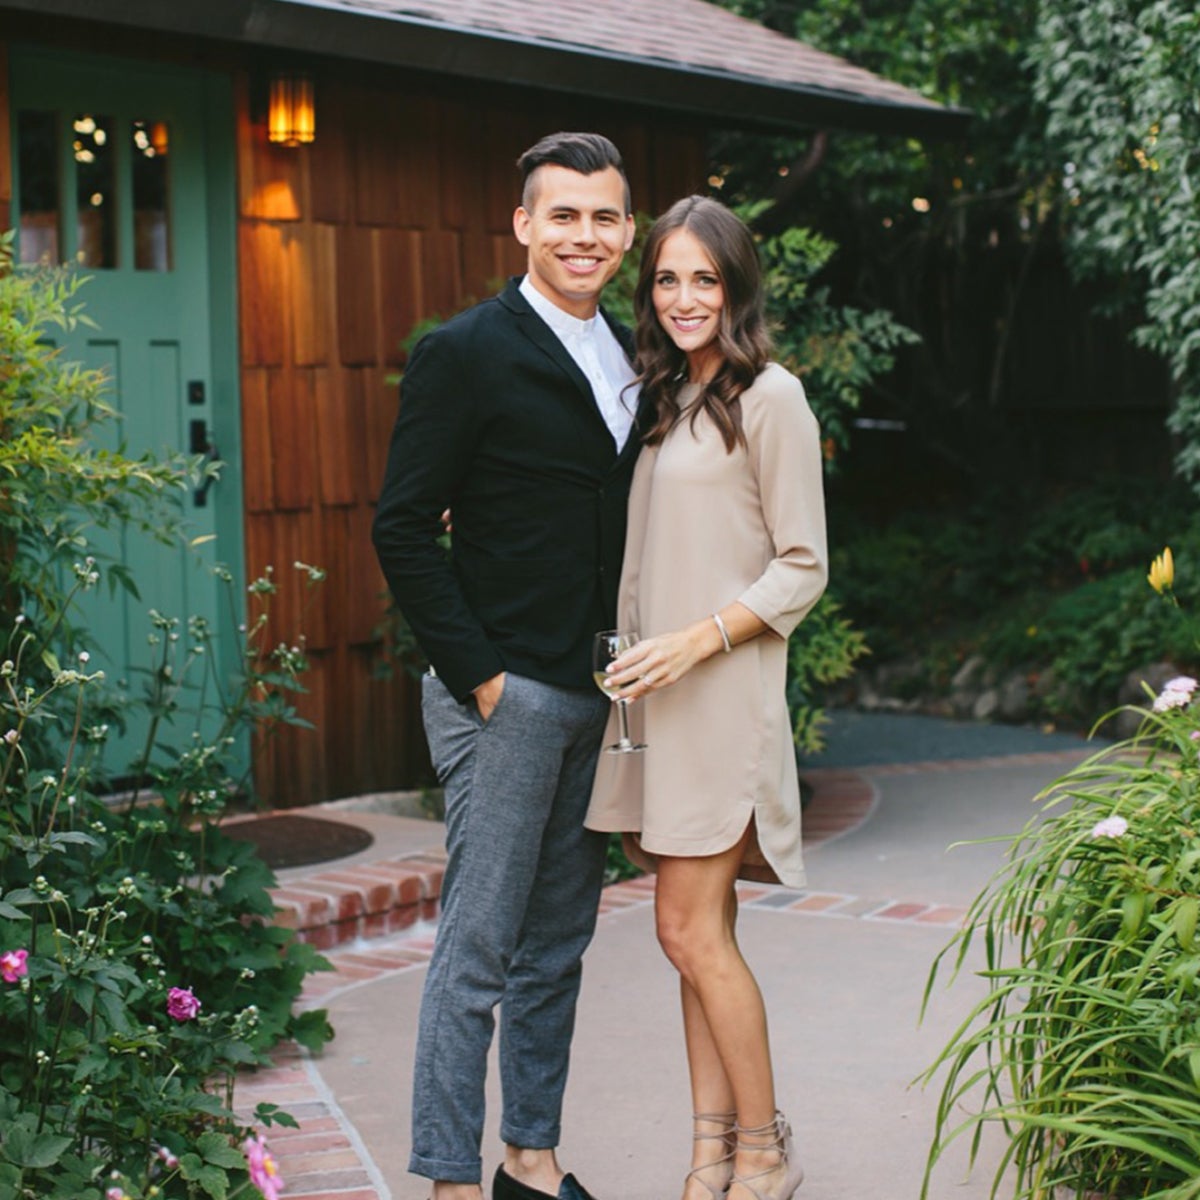 Couple posing for picture in front of home